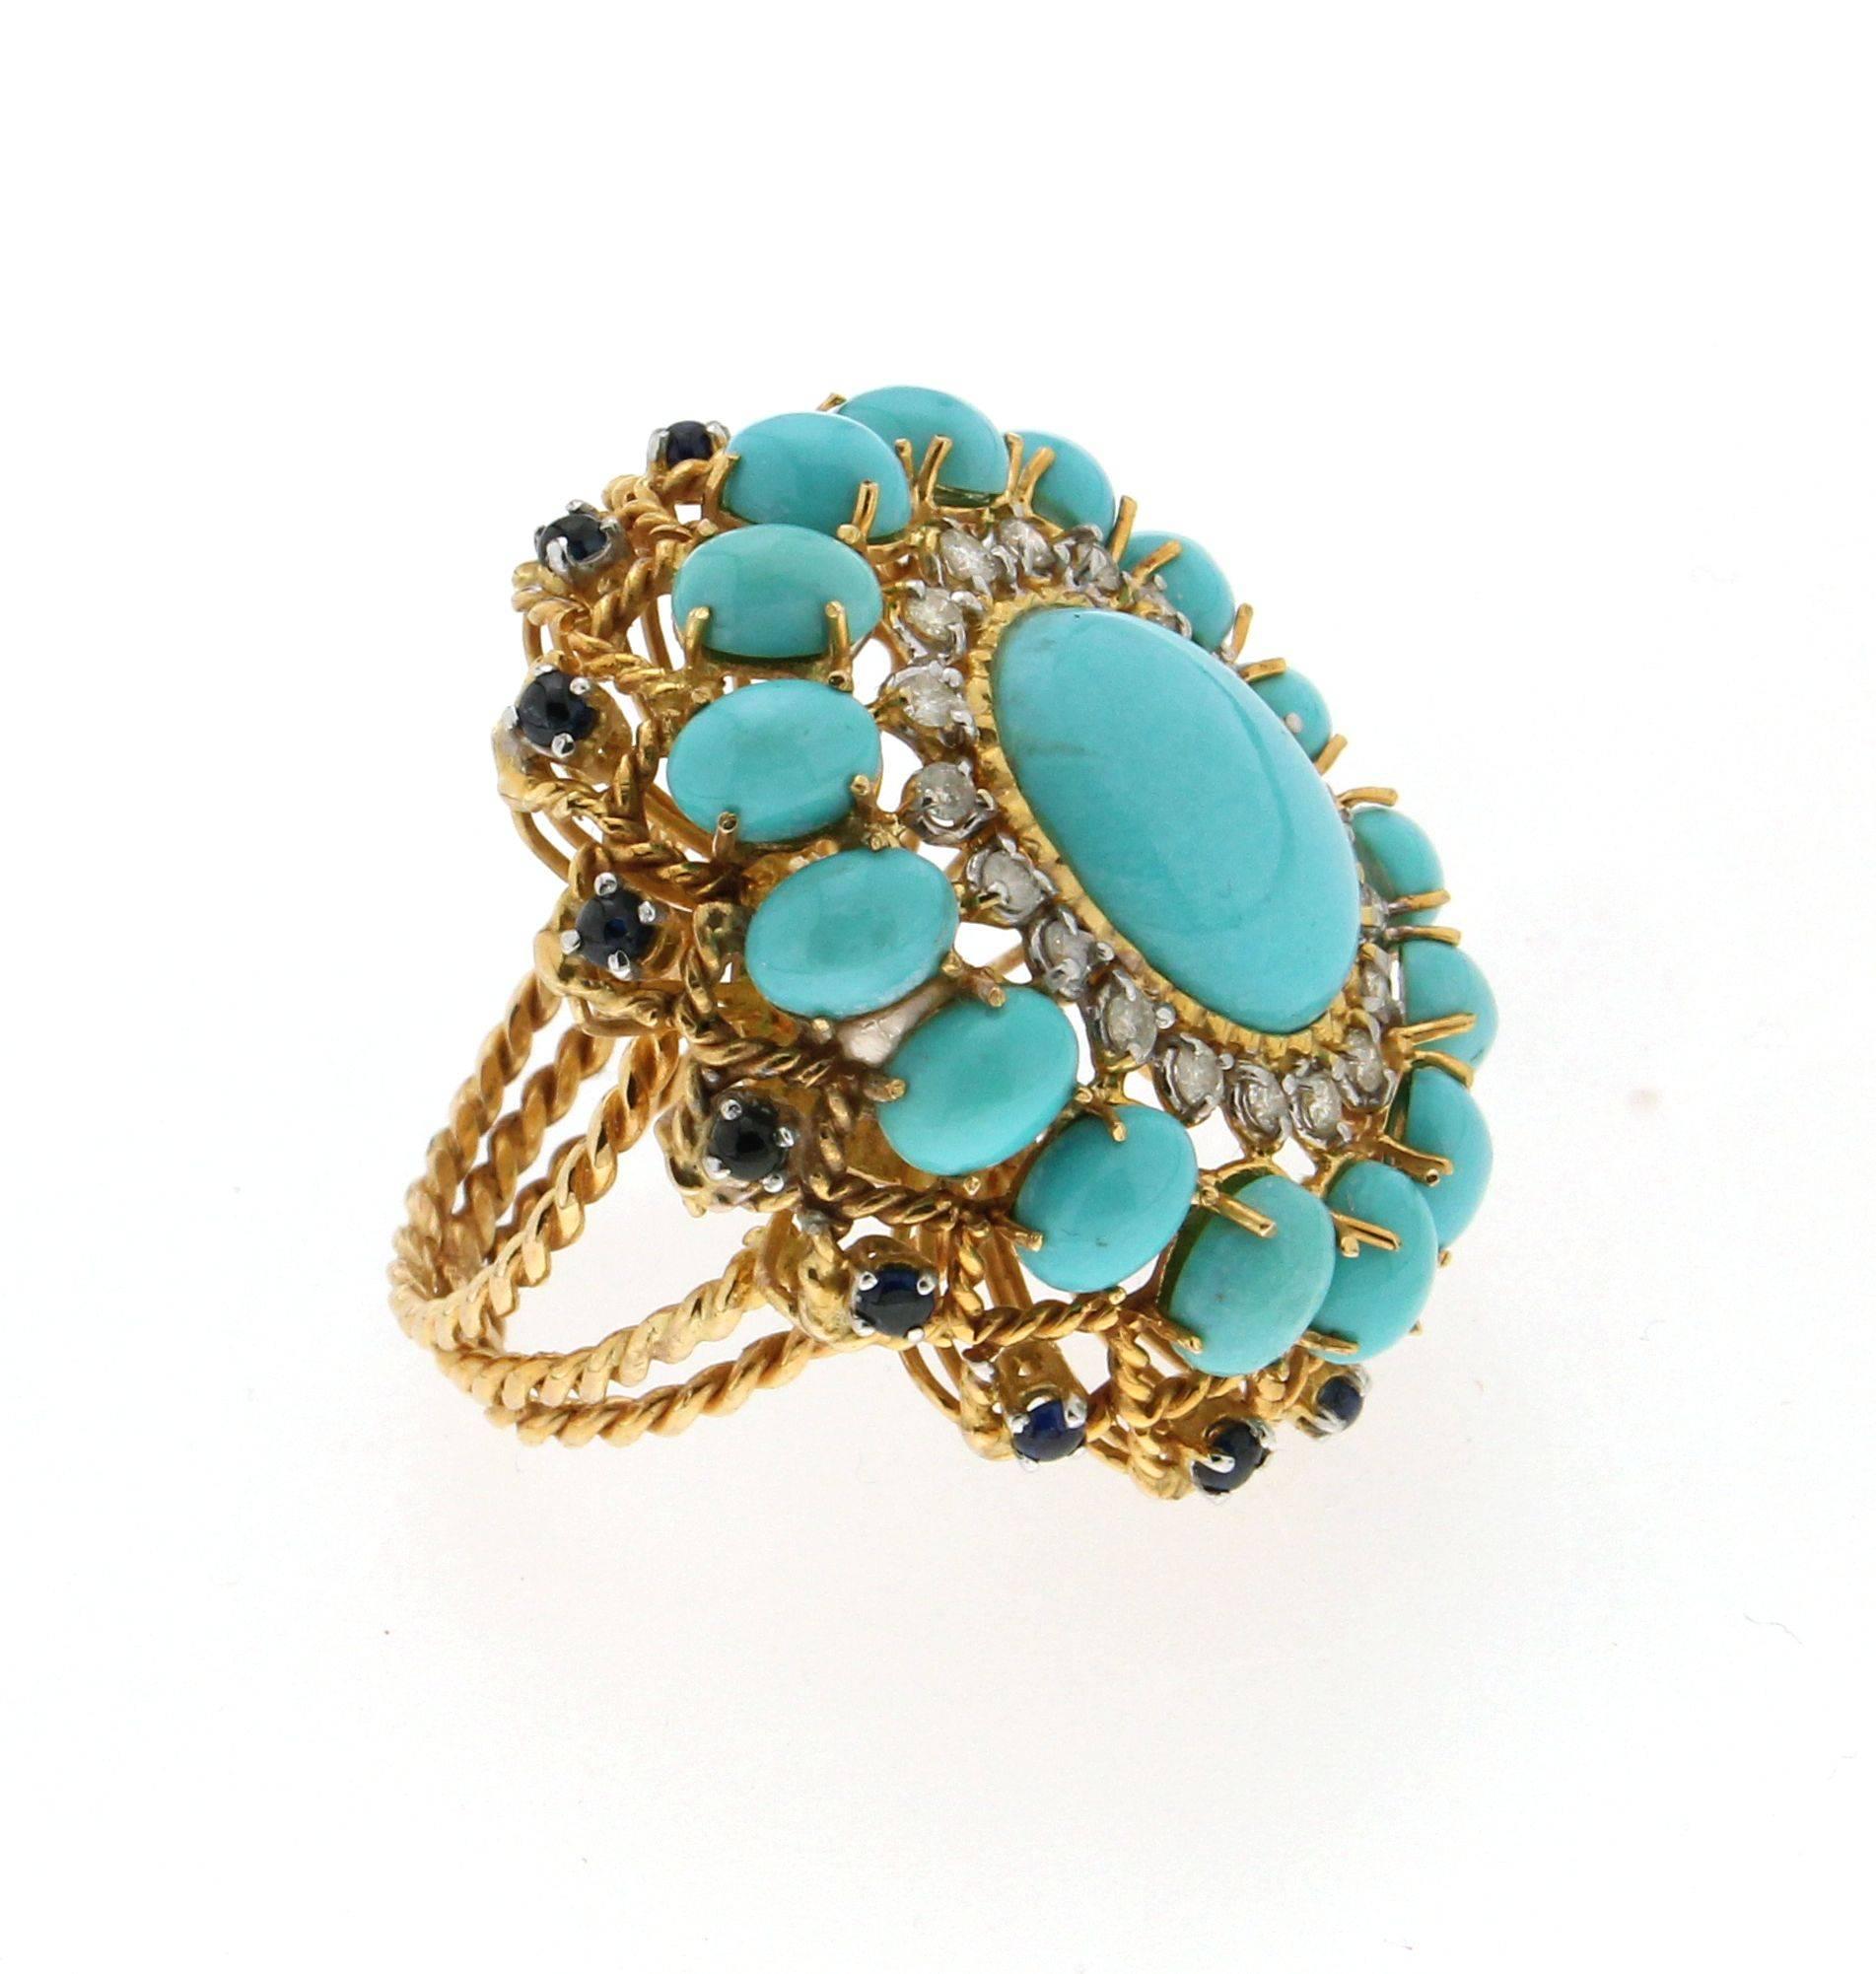 Fabulous turquoise ring,yellow gold 14 carat with diamonds and sapphires, turquoise 
from Arizona US

Ring Weight 19.30 gr
Diamonds 0.56 ct
Sapphires 1.22 ct
Turquoise 4.30 gr
Ring Size 7.5 us
Diameter 1,70 cm 0,66 inch
